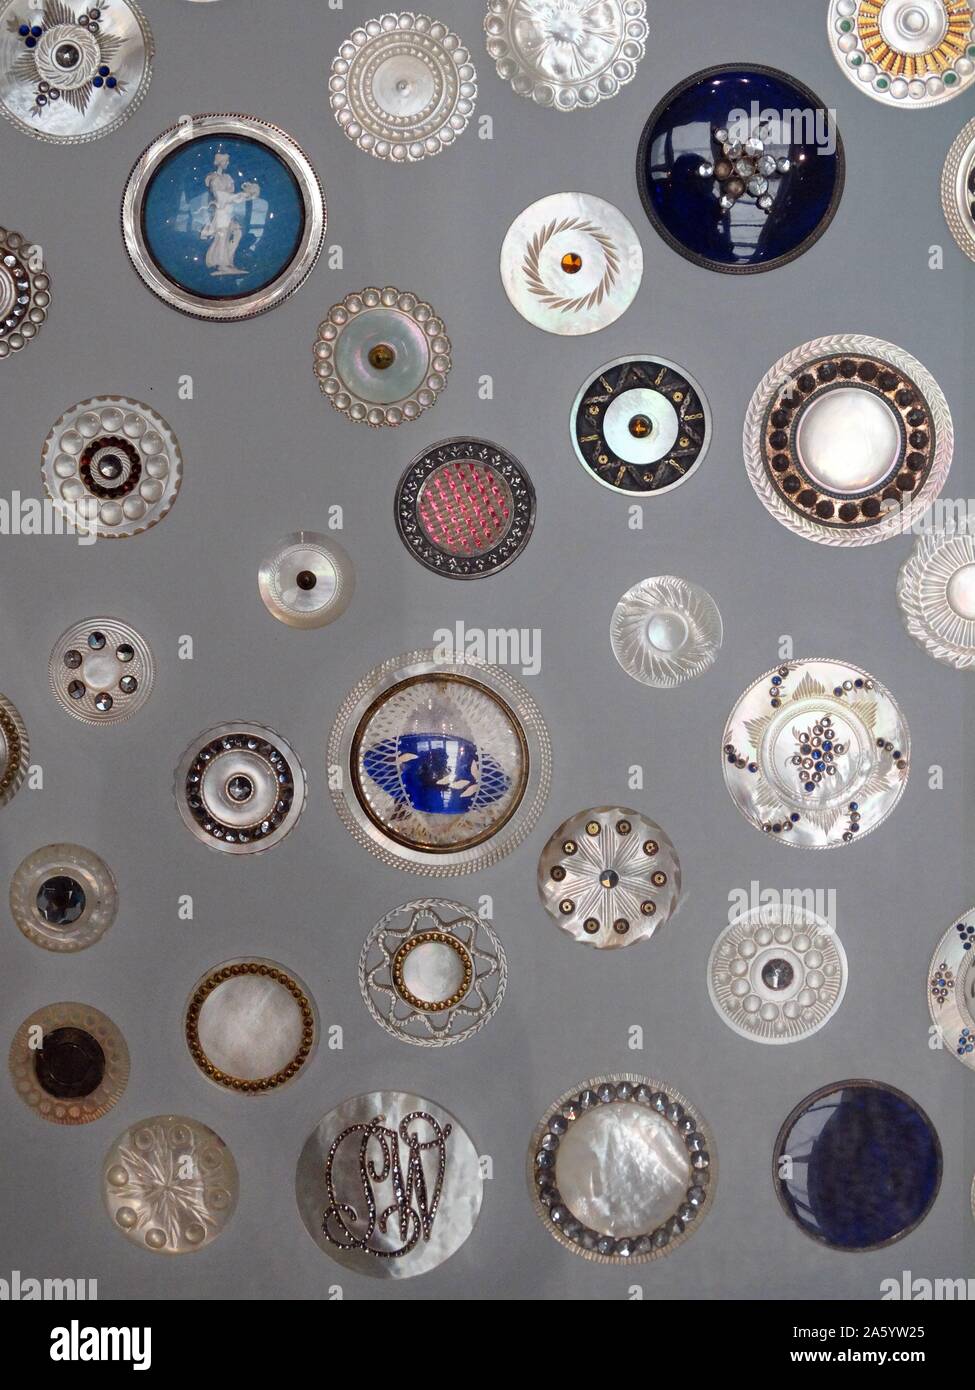 Pearl and Metal Buttons made in Birmingham. Collected by James Luckcock. Dated 1780 Stock Photo